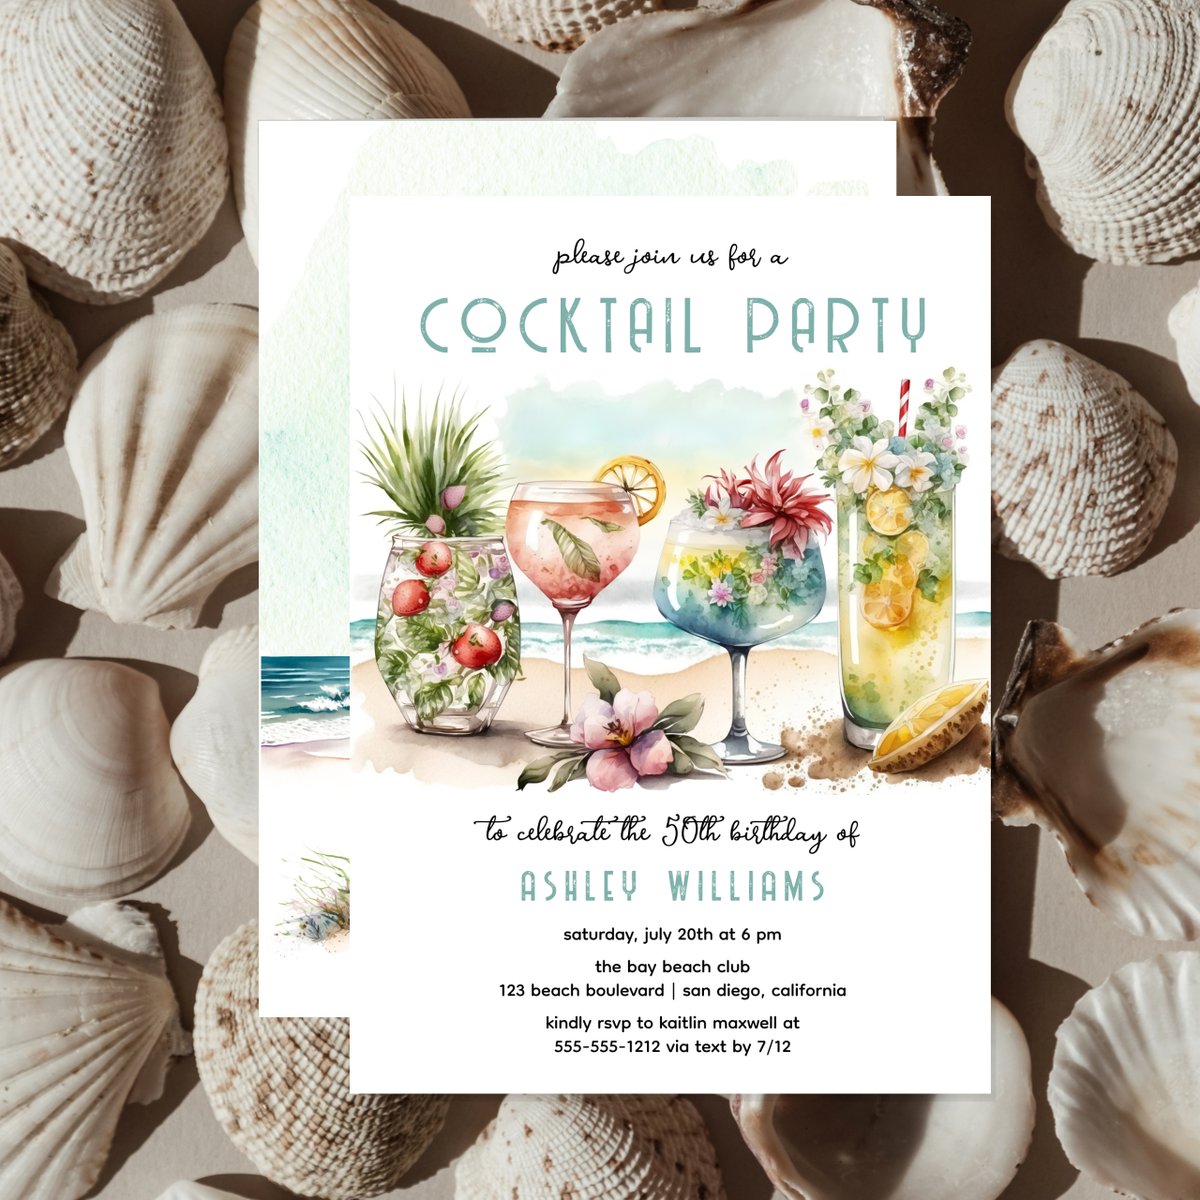 Beach Tropical Cocktails 50th Birthday Party Invitation

zazzle.com/beach_tropical…

#50thbirthdayparty #50yearsold #cocktailparty #beachparty #girlsnightout #celebration #summerbirthday #tropicaldrinks #beach #ocean #hibiscus #zazzlemade #holidayheartsdesigns #holidayhearts